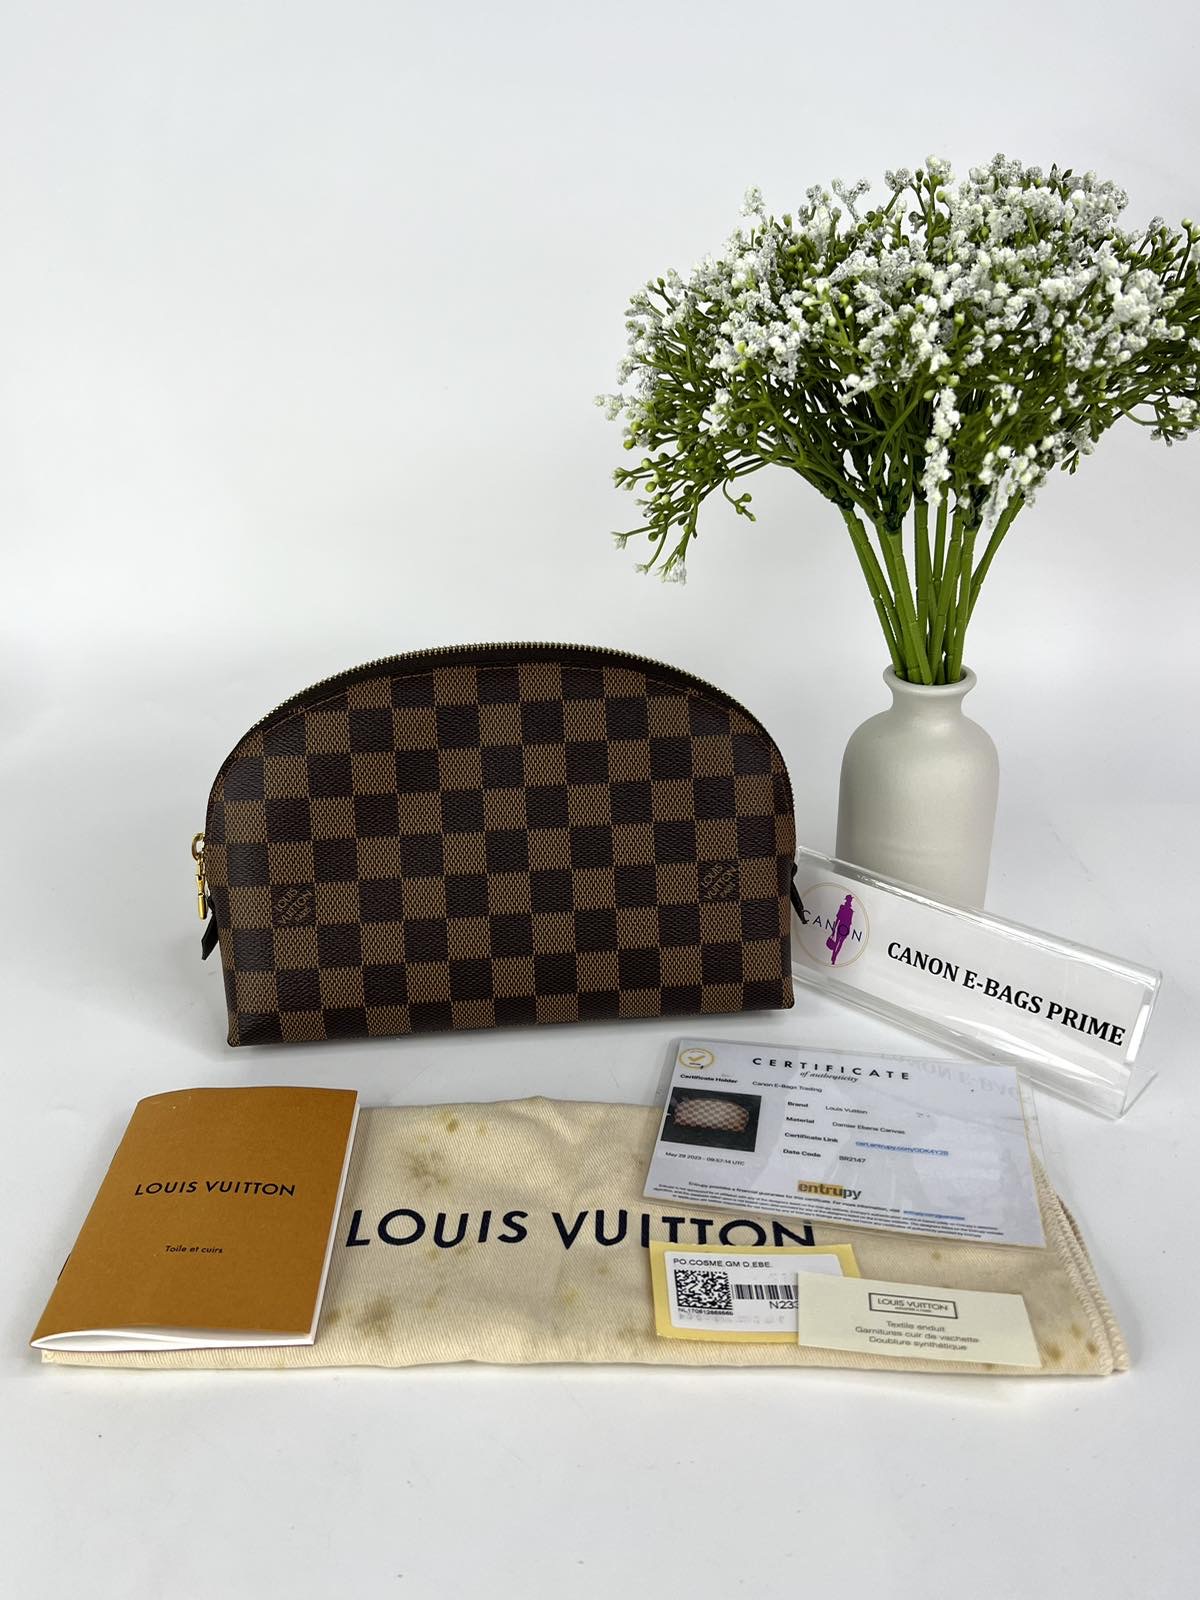 Louis Vuitton Damier Ebene Cosmetic Pouch GM. DC: BN2147. Made in France.  With care booklet, dustbag & certificate of authenticity from ENTRUPY ❤️ -  Canon E-Bags Prime